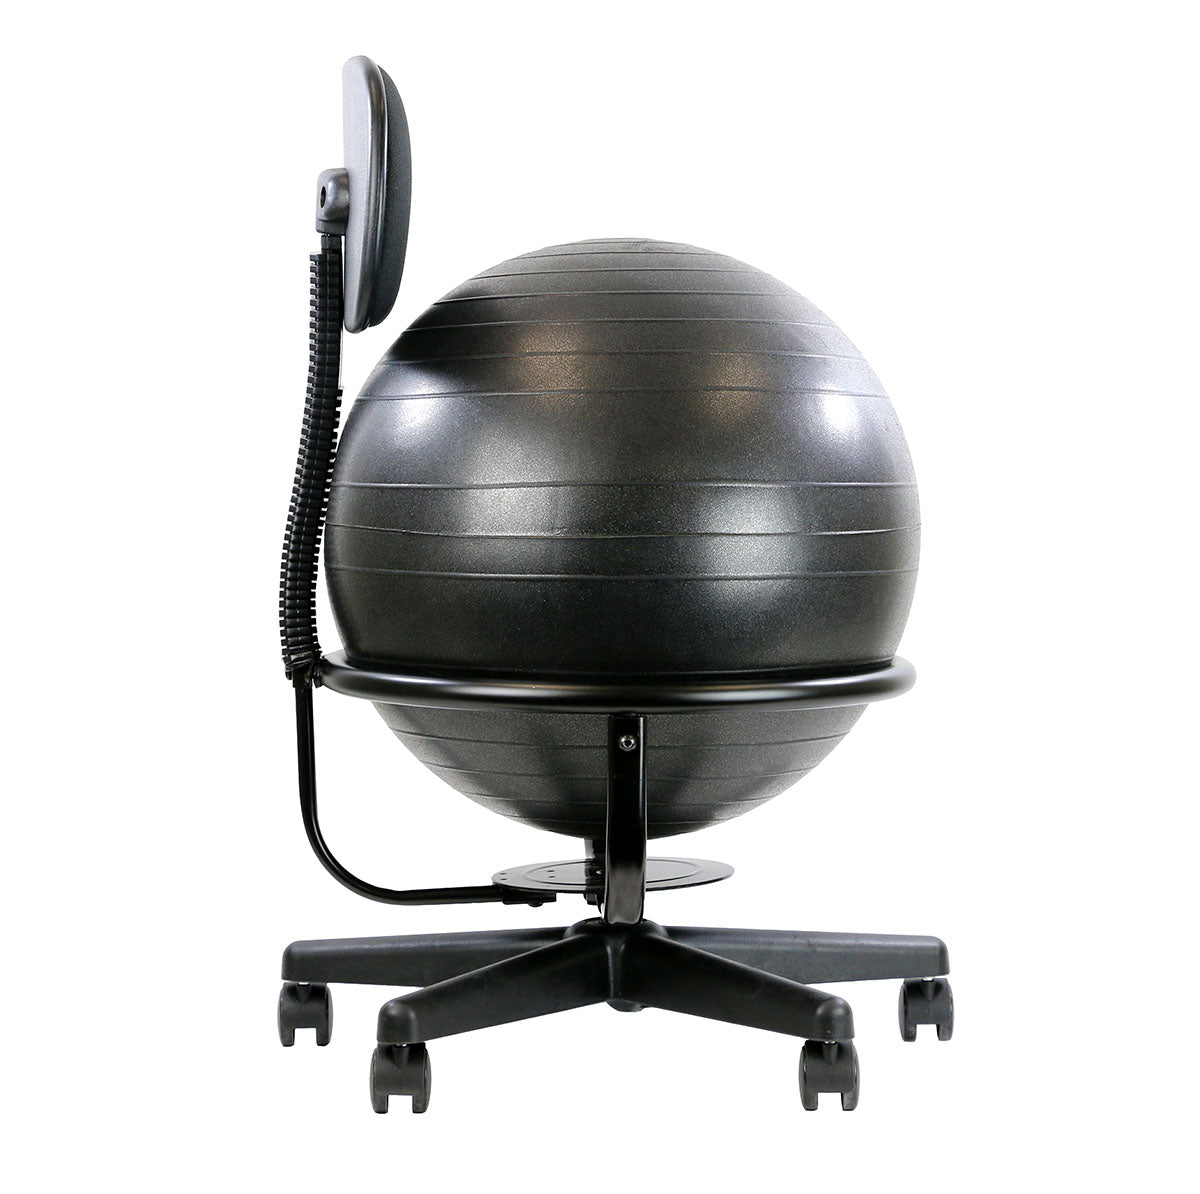 CanDo Metal Mobile Ball Stabilizer Chair without Arms, Black